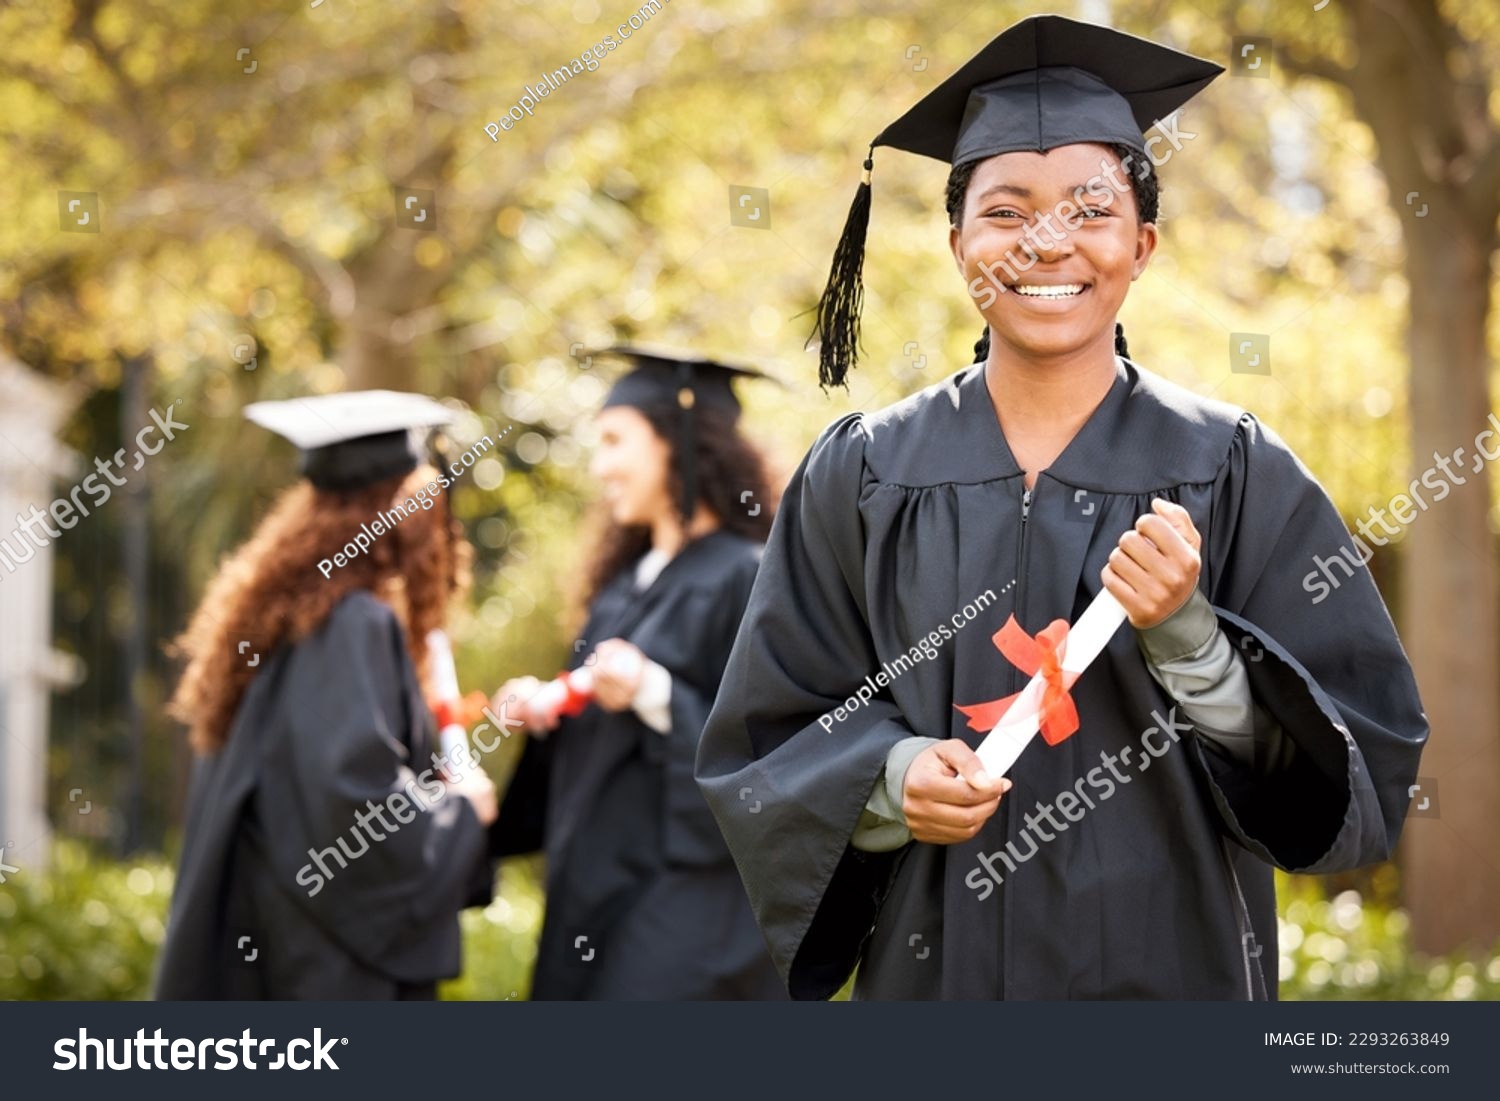 Im excited to celebrate this day with my peers. Portrait of a young woman holding her diploma on graduation day. #2293263849